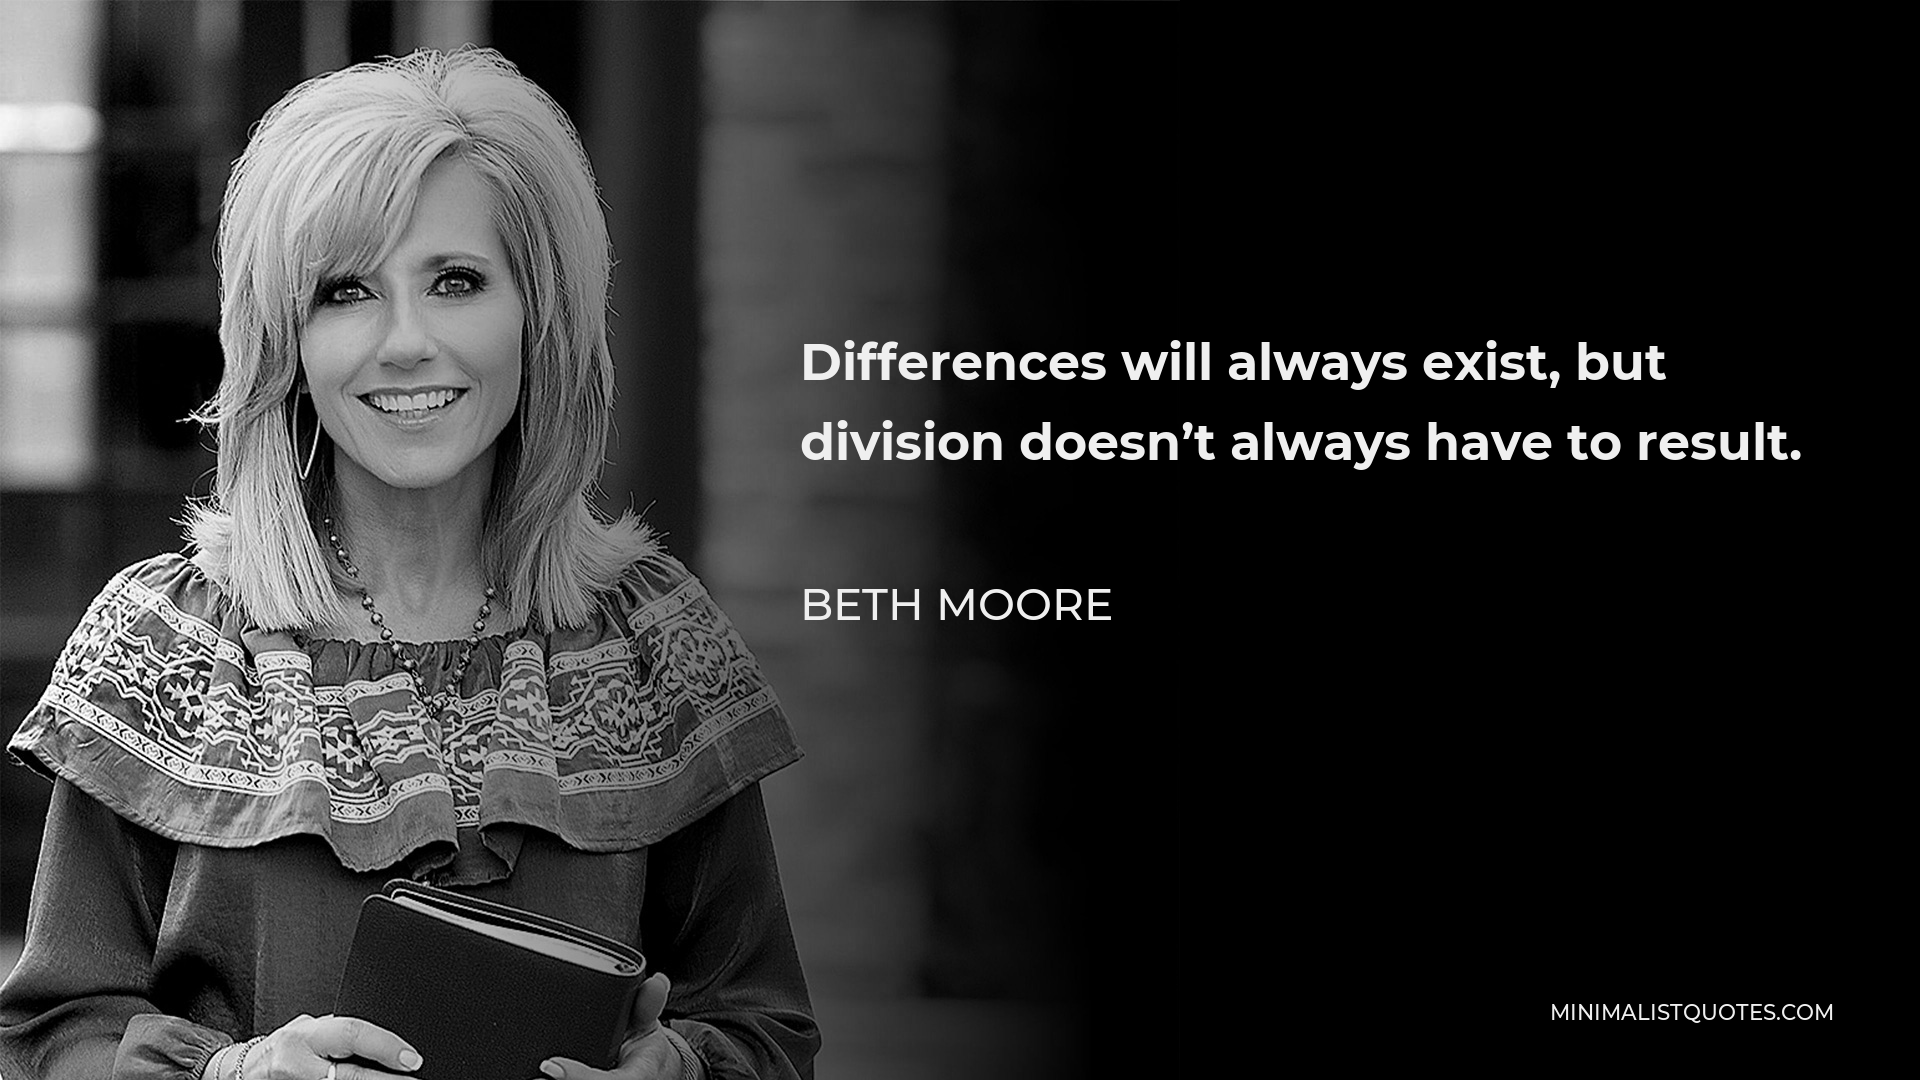 Beth Moore Quote - Differences will always exist, but division doesn’t always have to result.